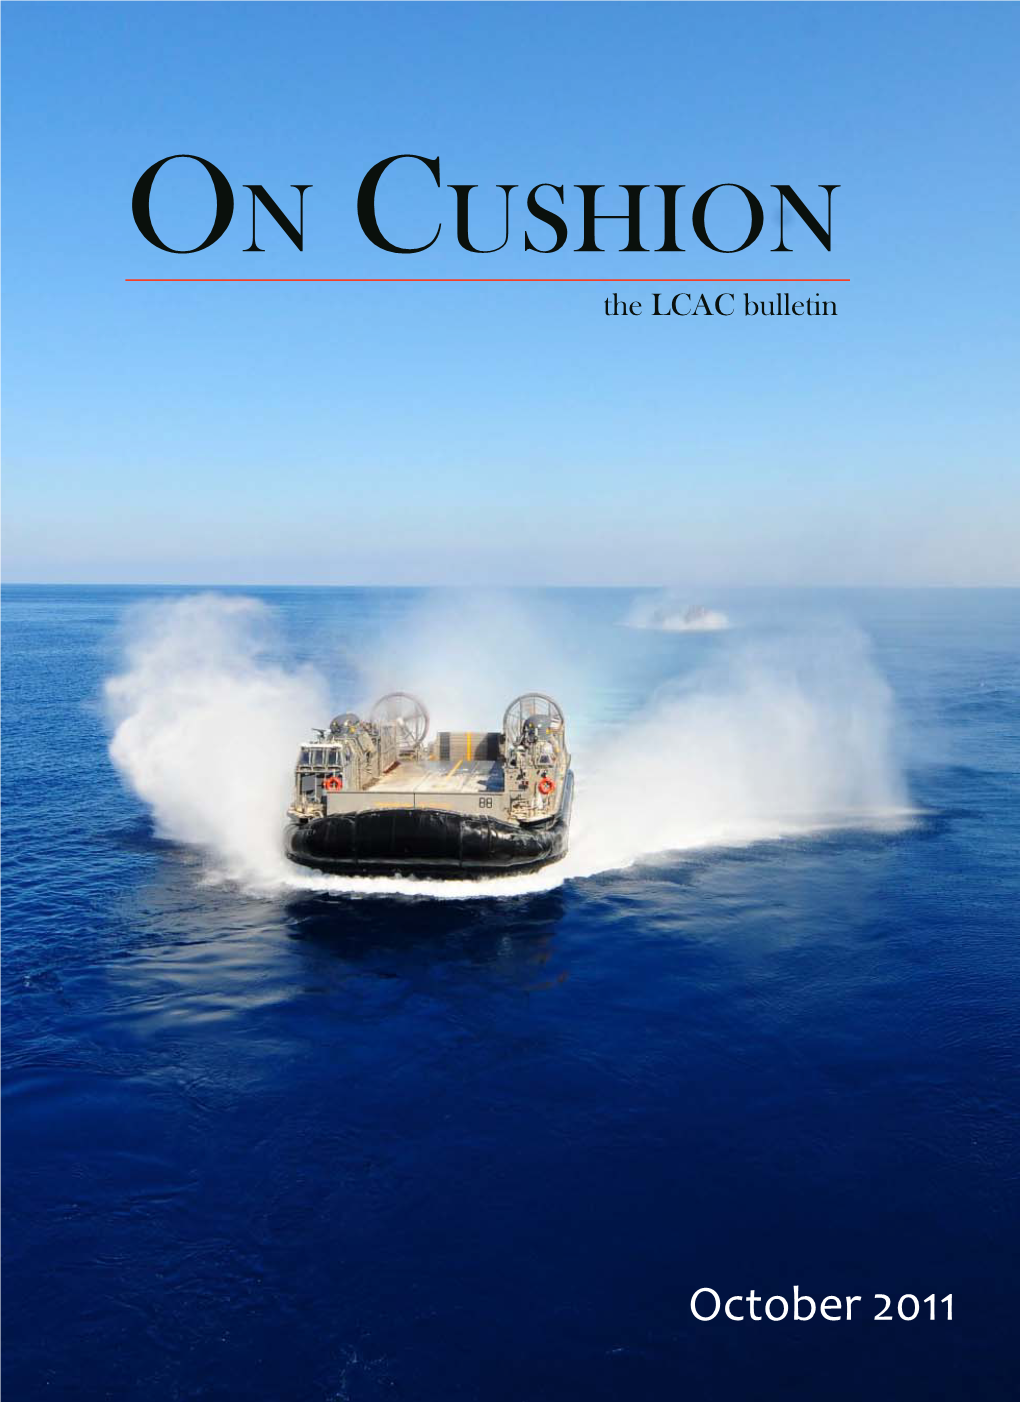 Copy of on Cushion 2011.Indd